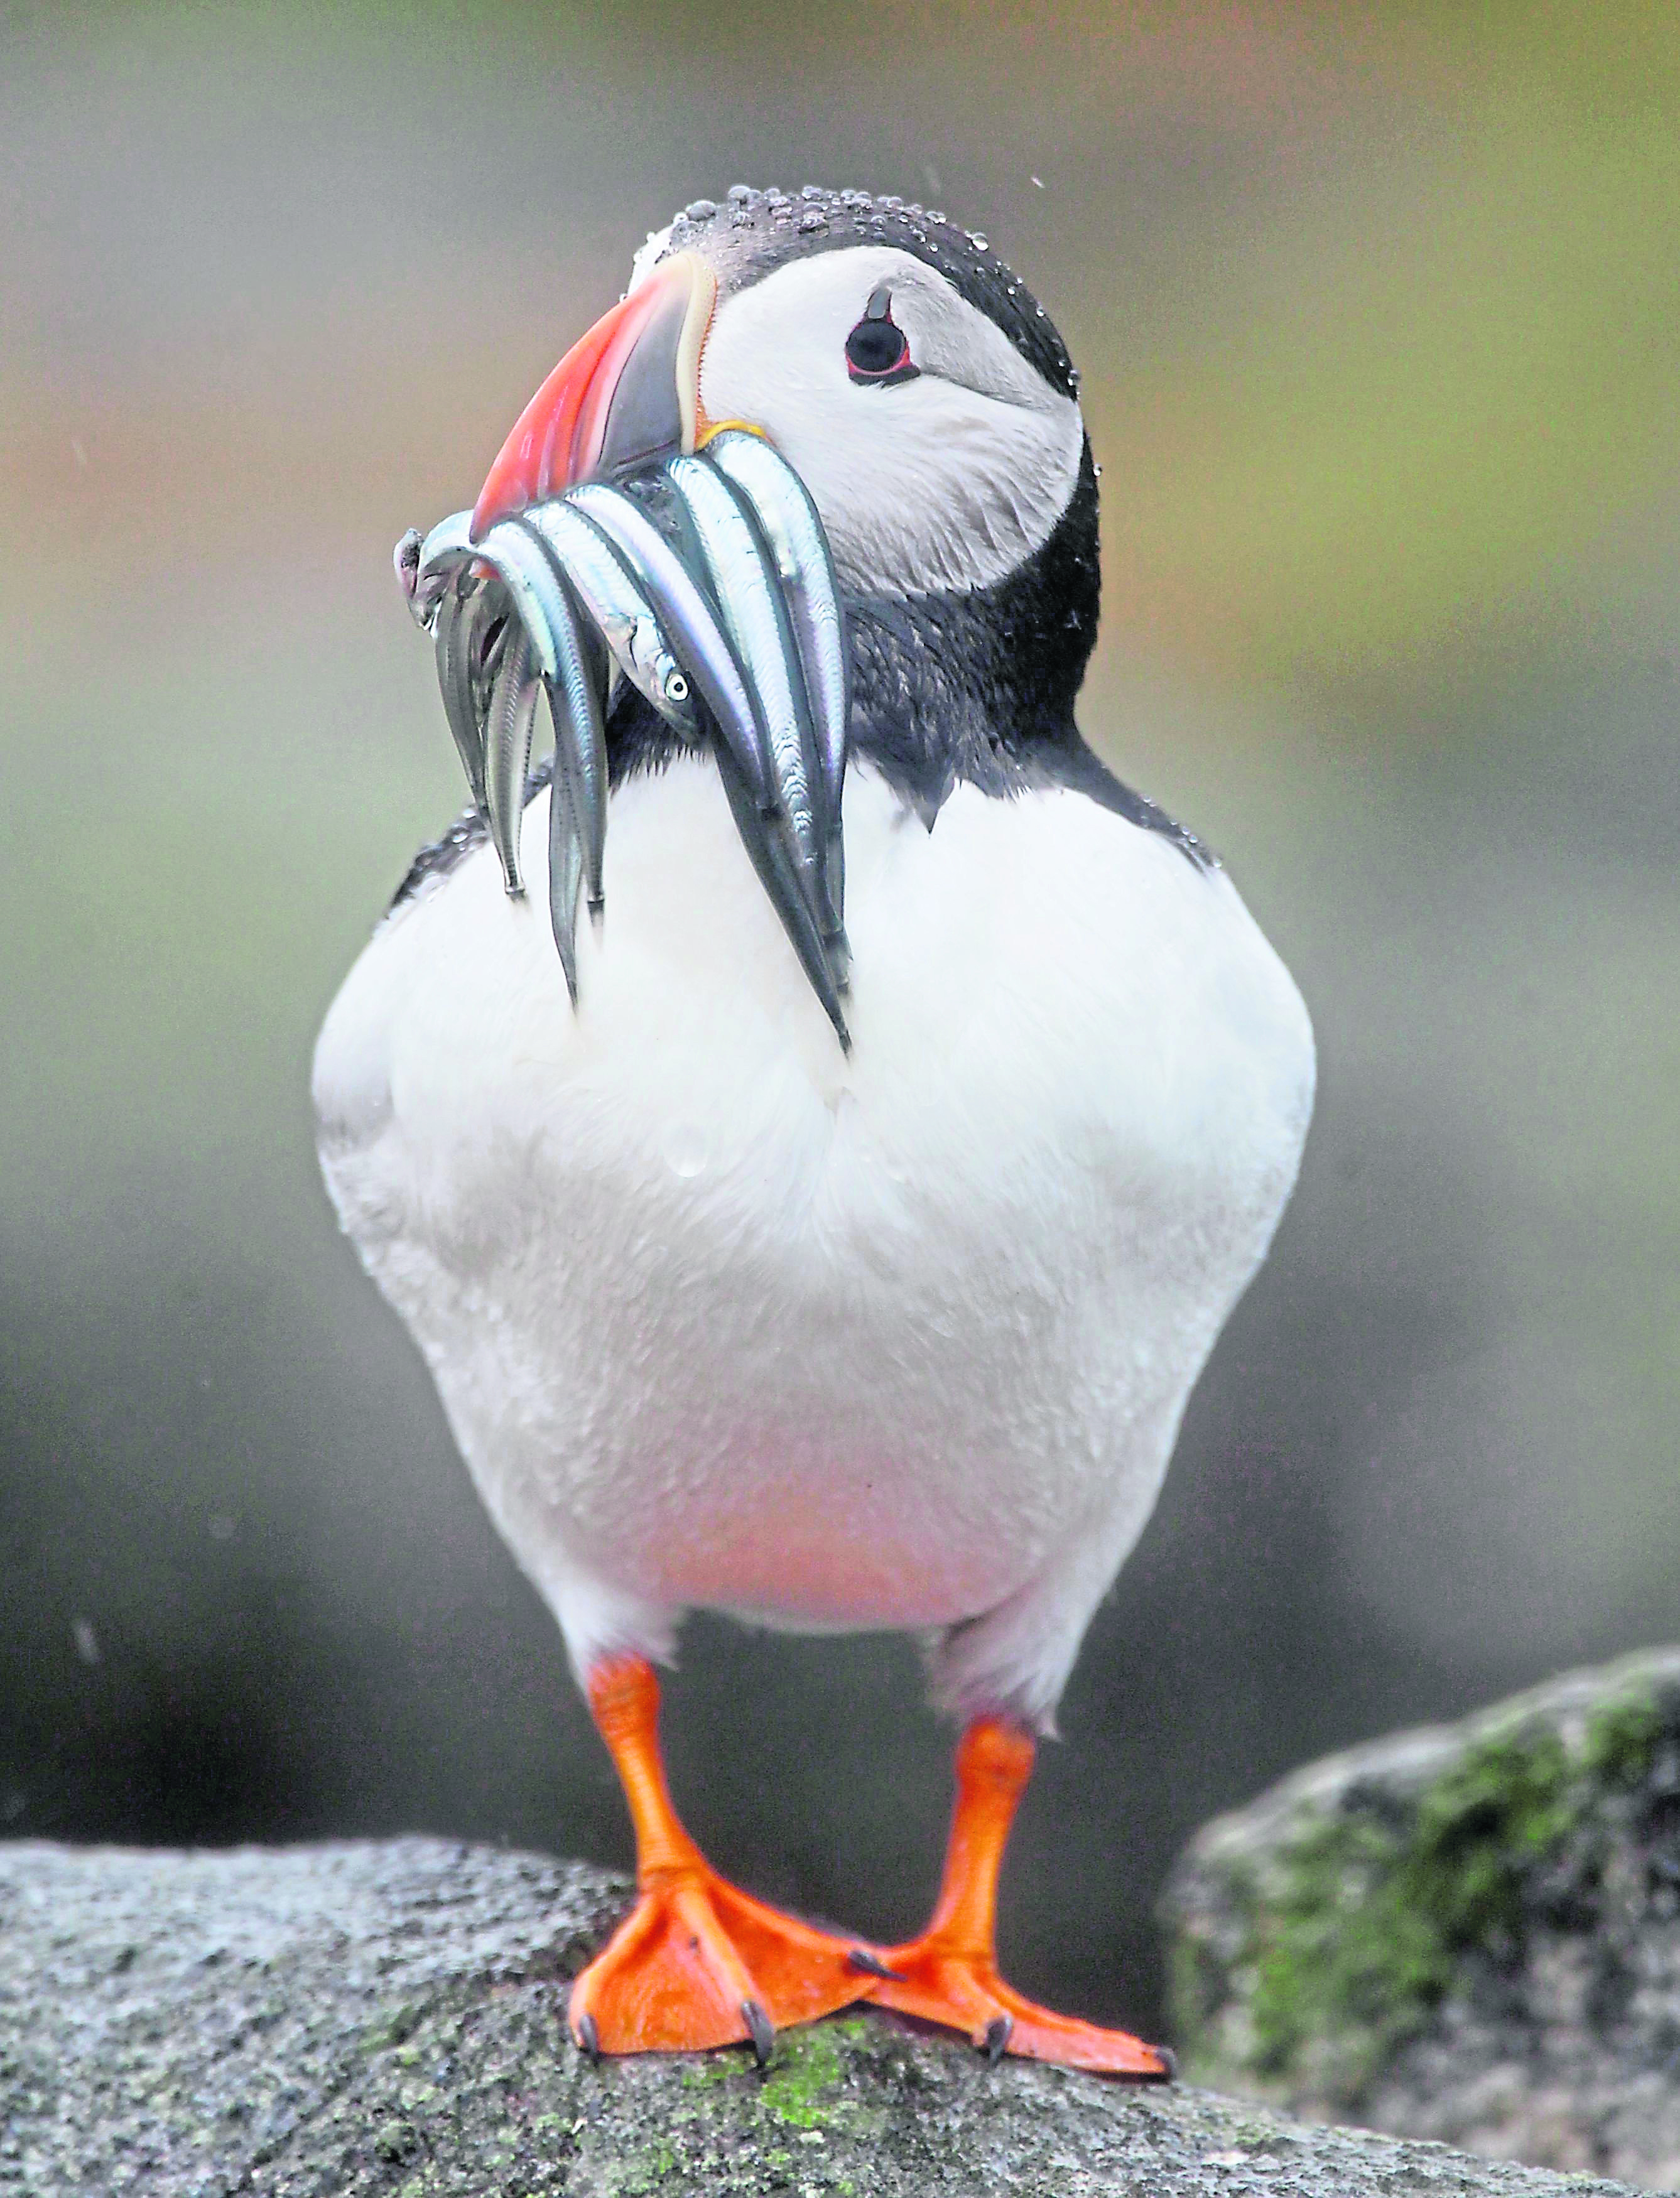 A puffin carrying fish.
Photo by Danny Lawson/PA Wire